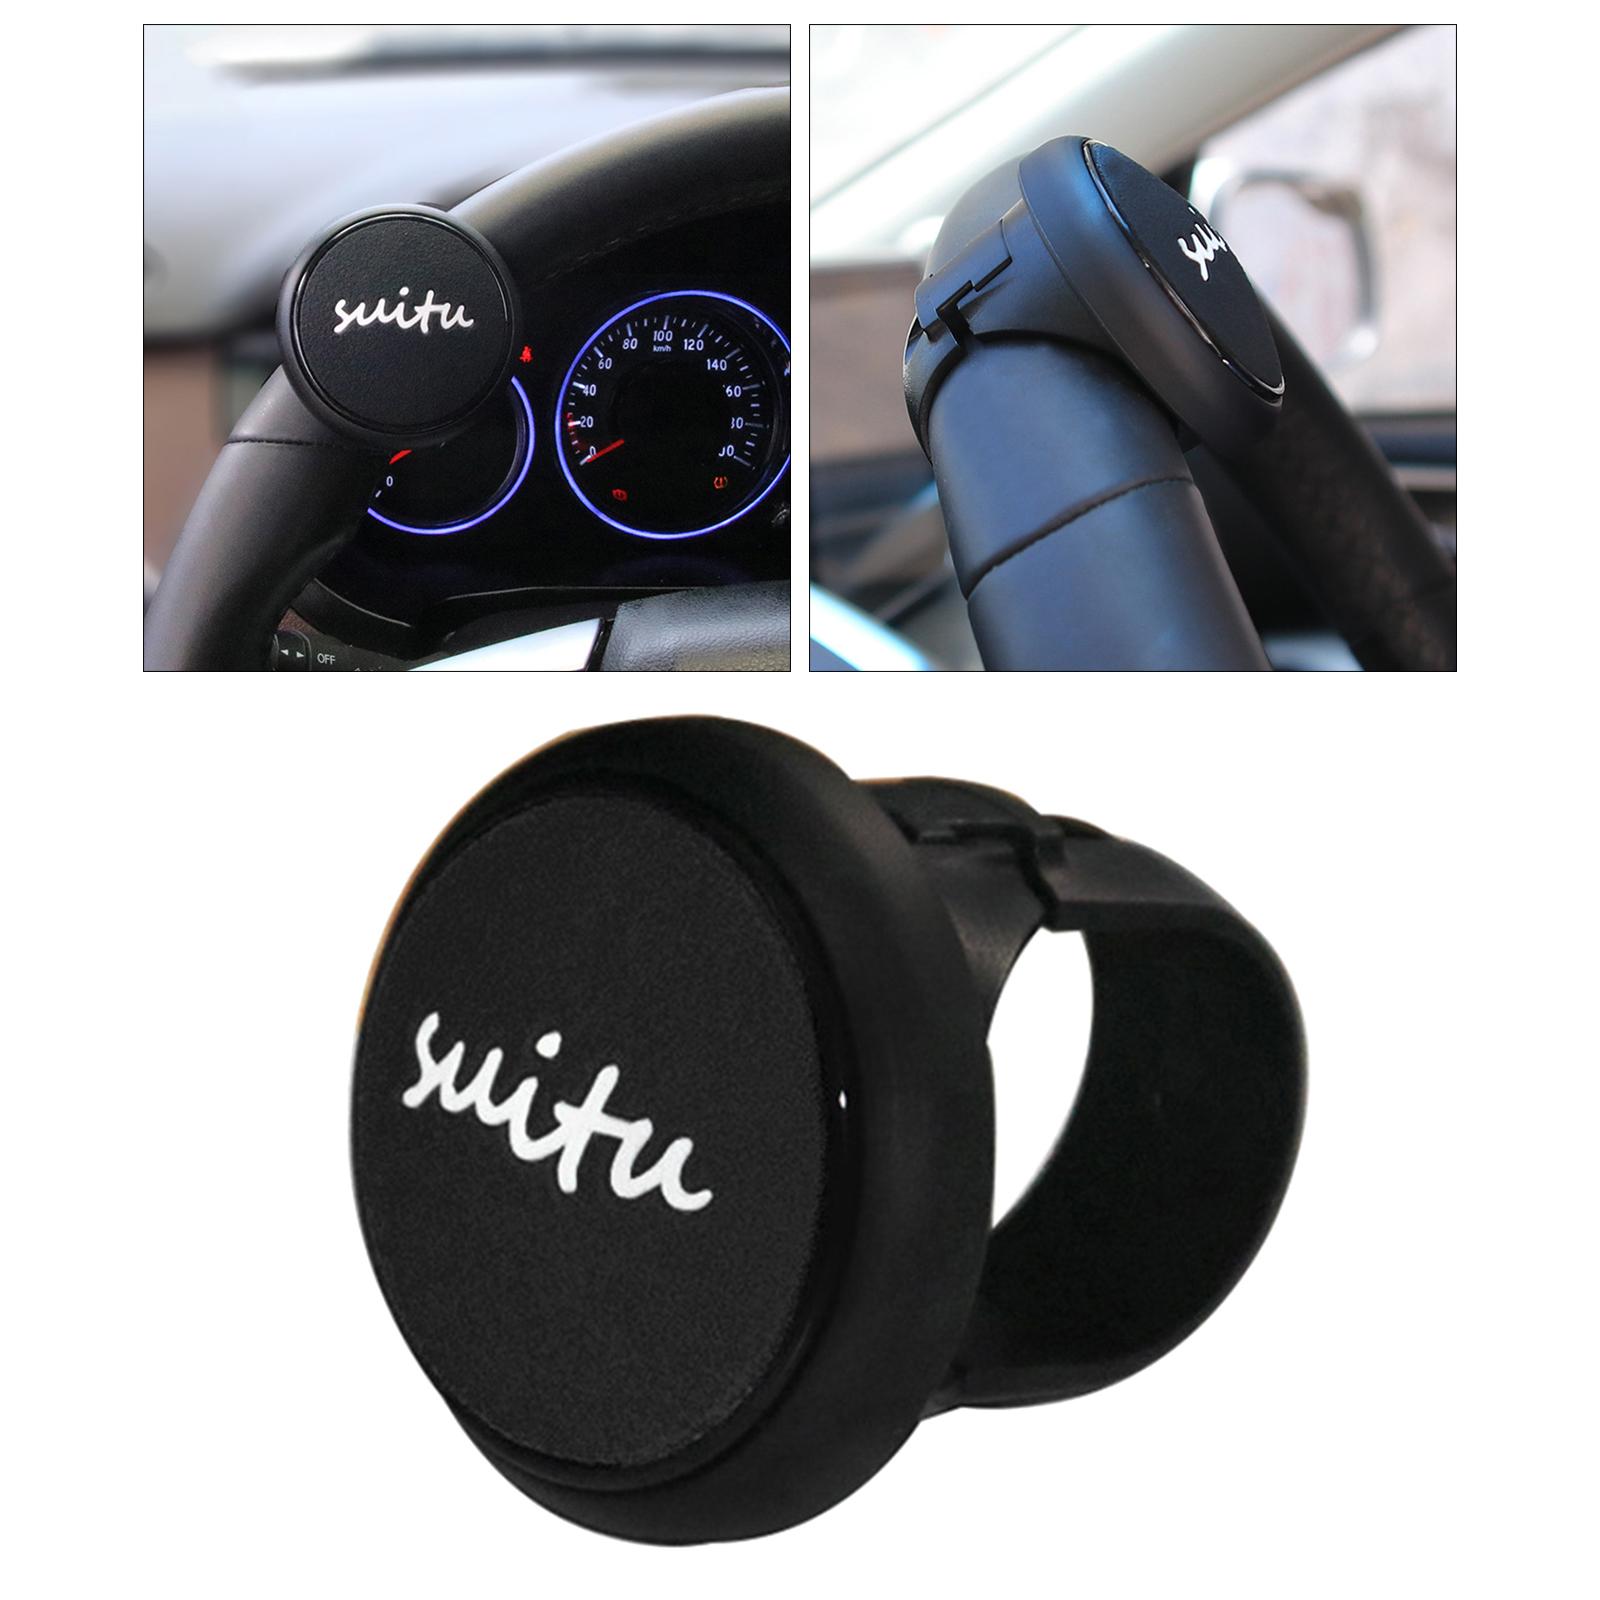 Car Booster Ball Steering Wheel 360 Degree Vehicle Car Styling Truck Black